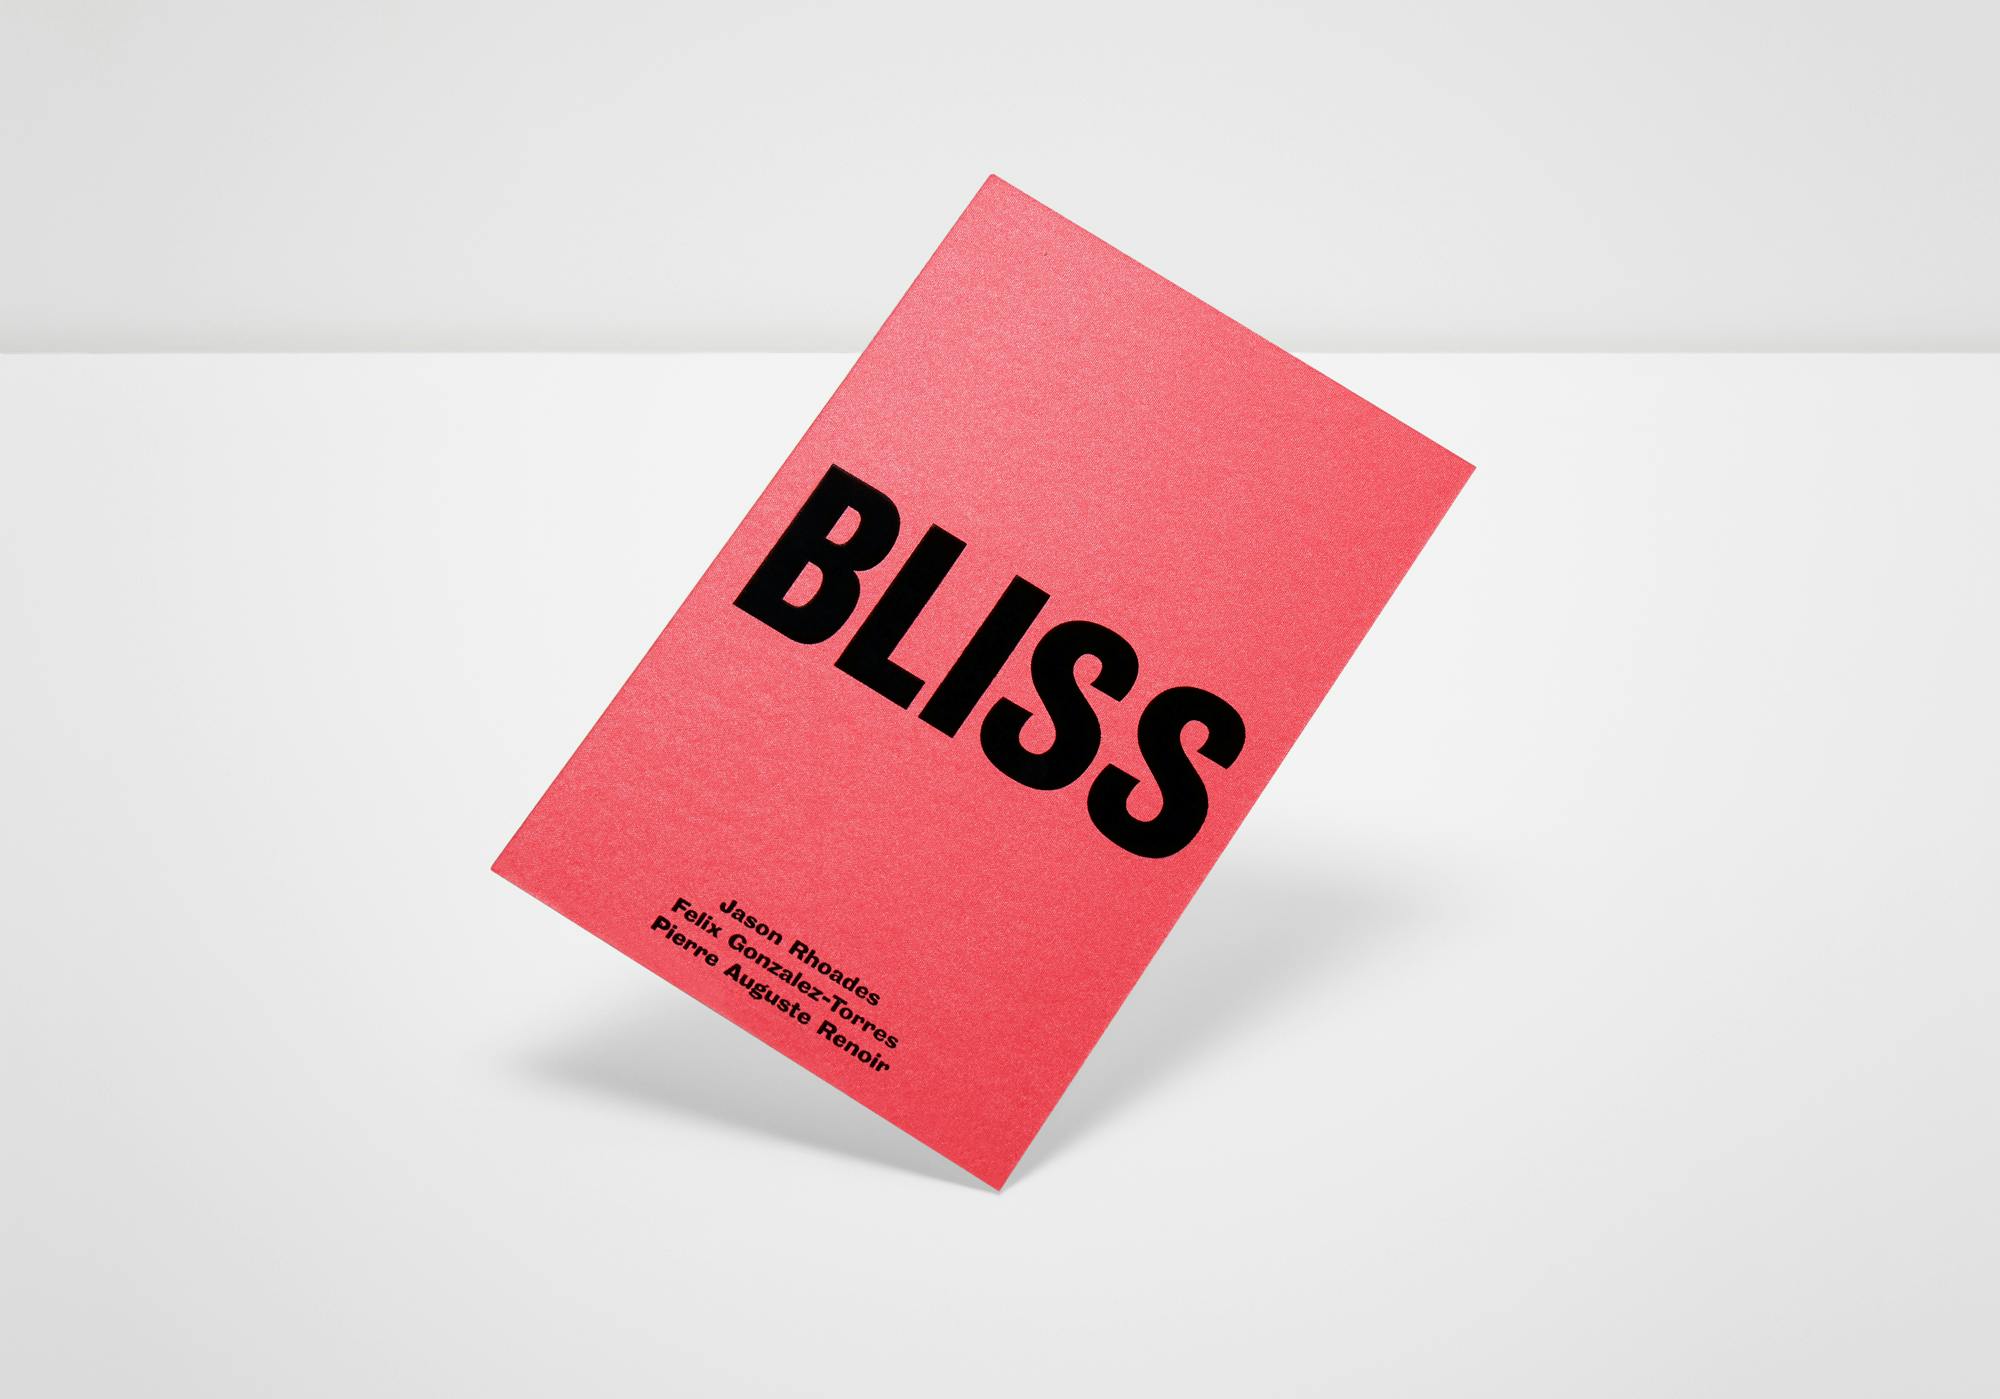 Bliss Exhibition Identity Designed by Extract Studio